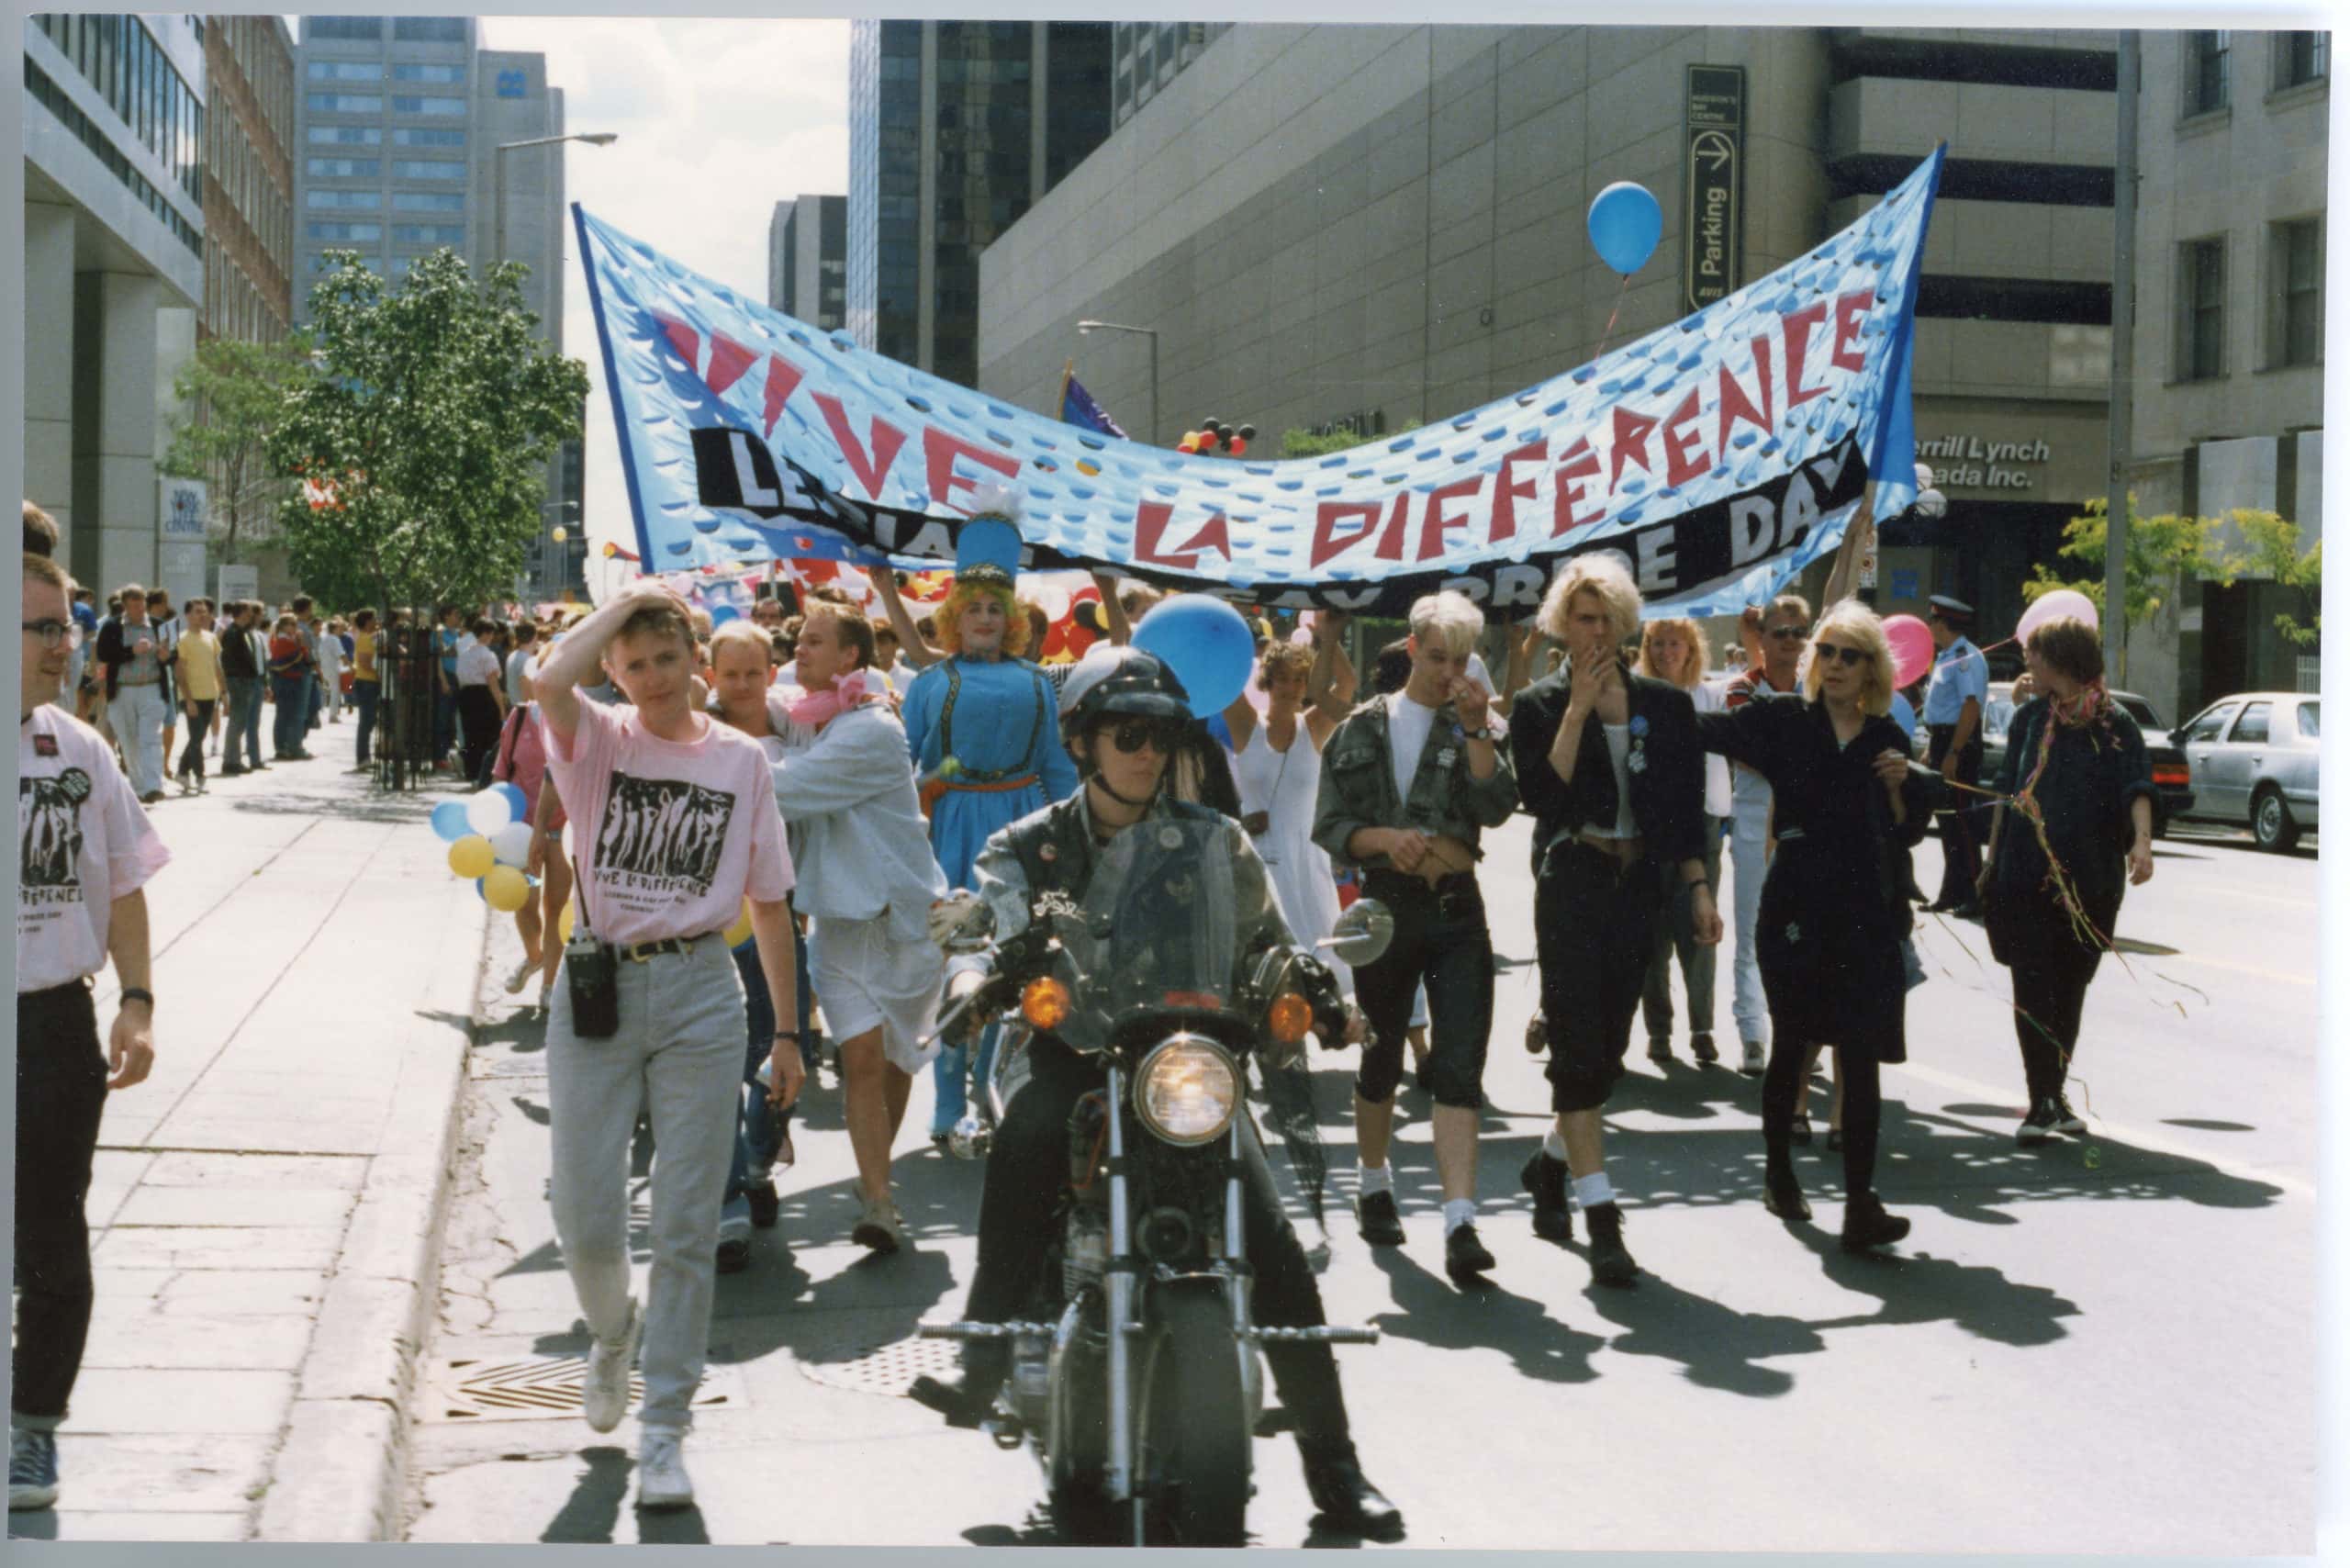 Group parades down street holding “Vive la difference” flag, led by a motorcycle